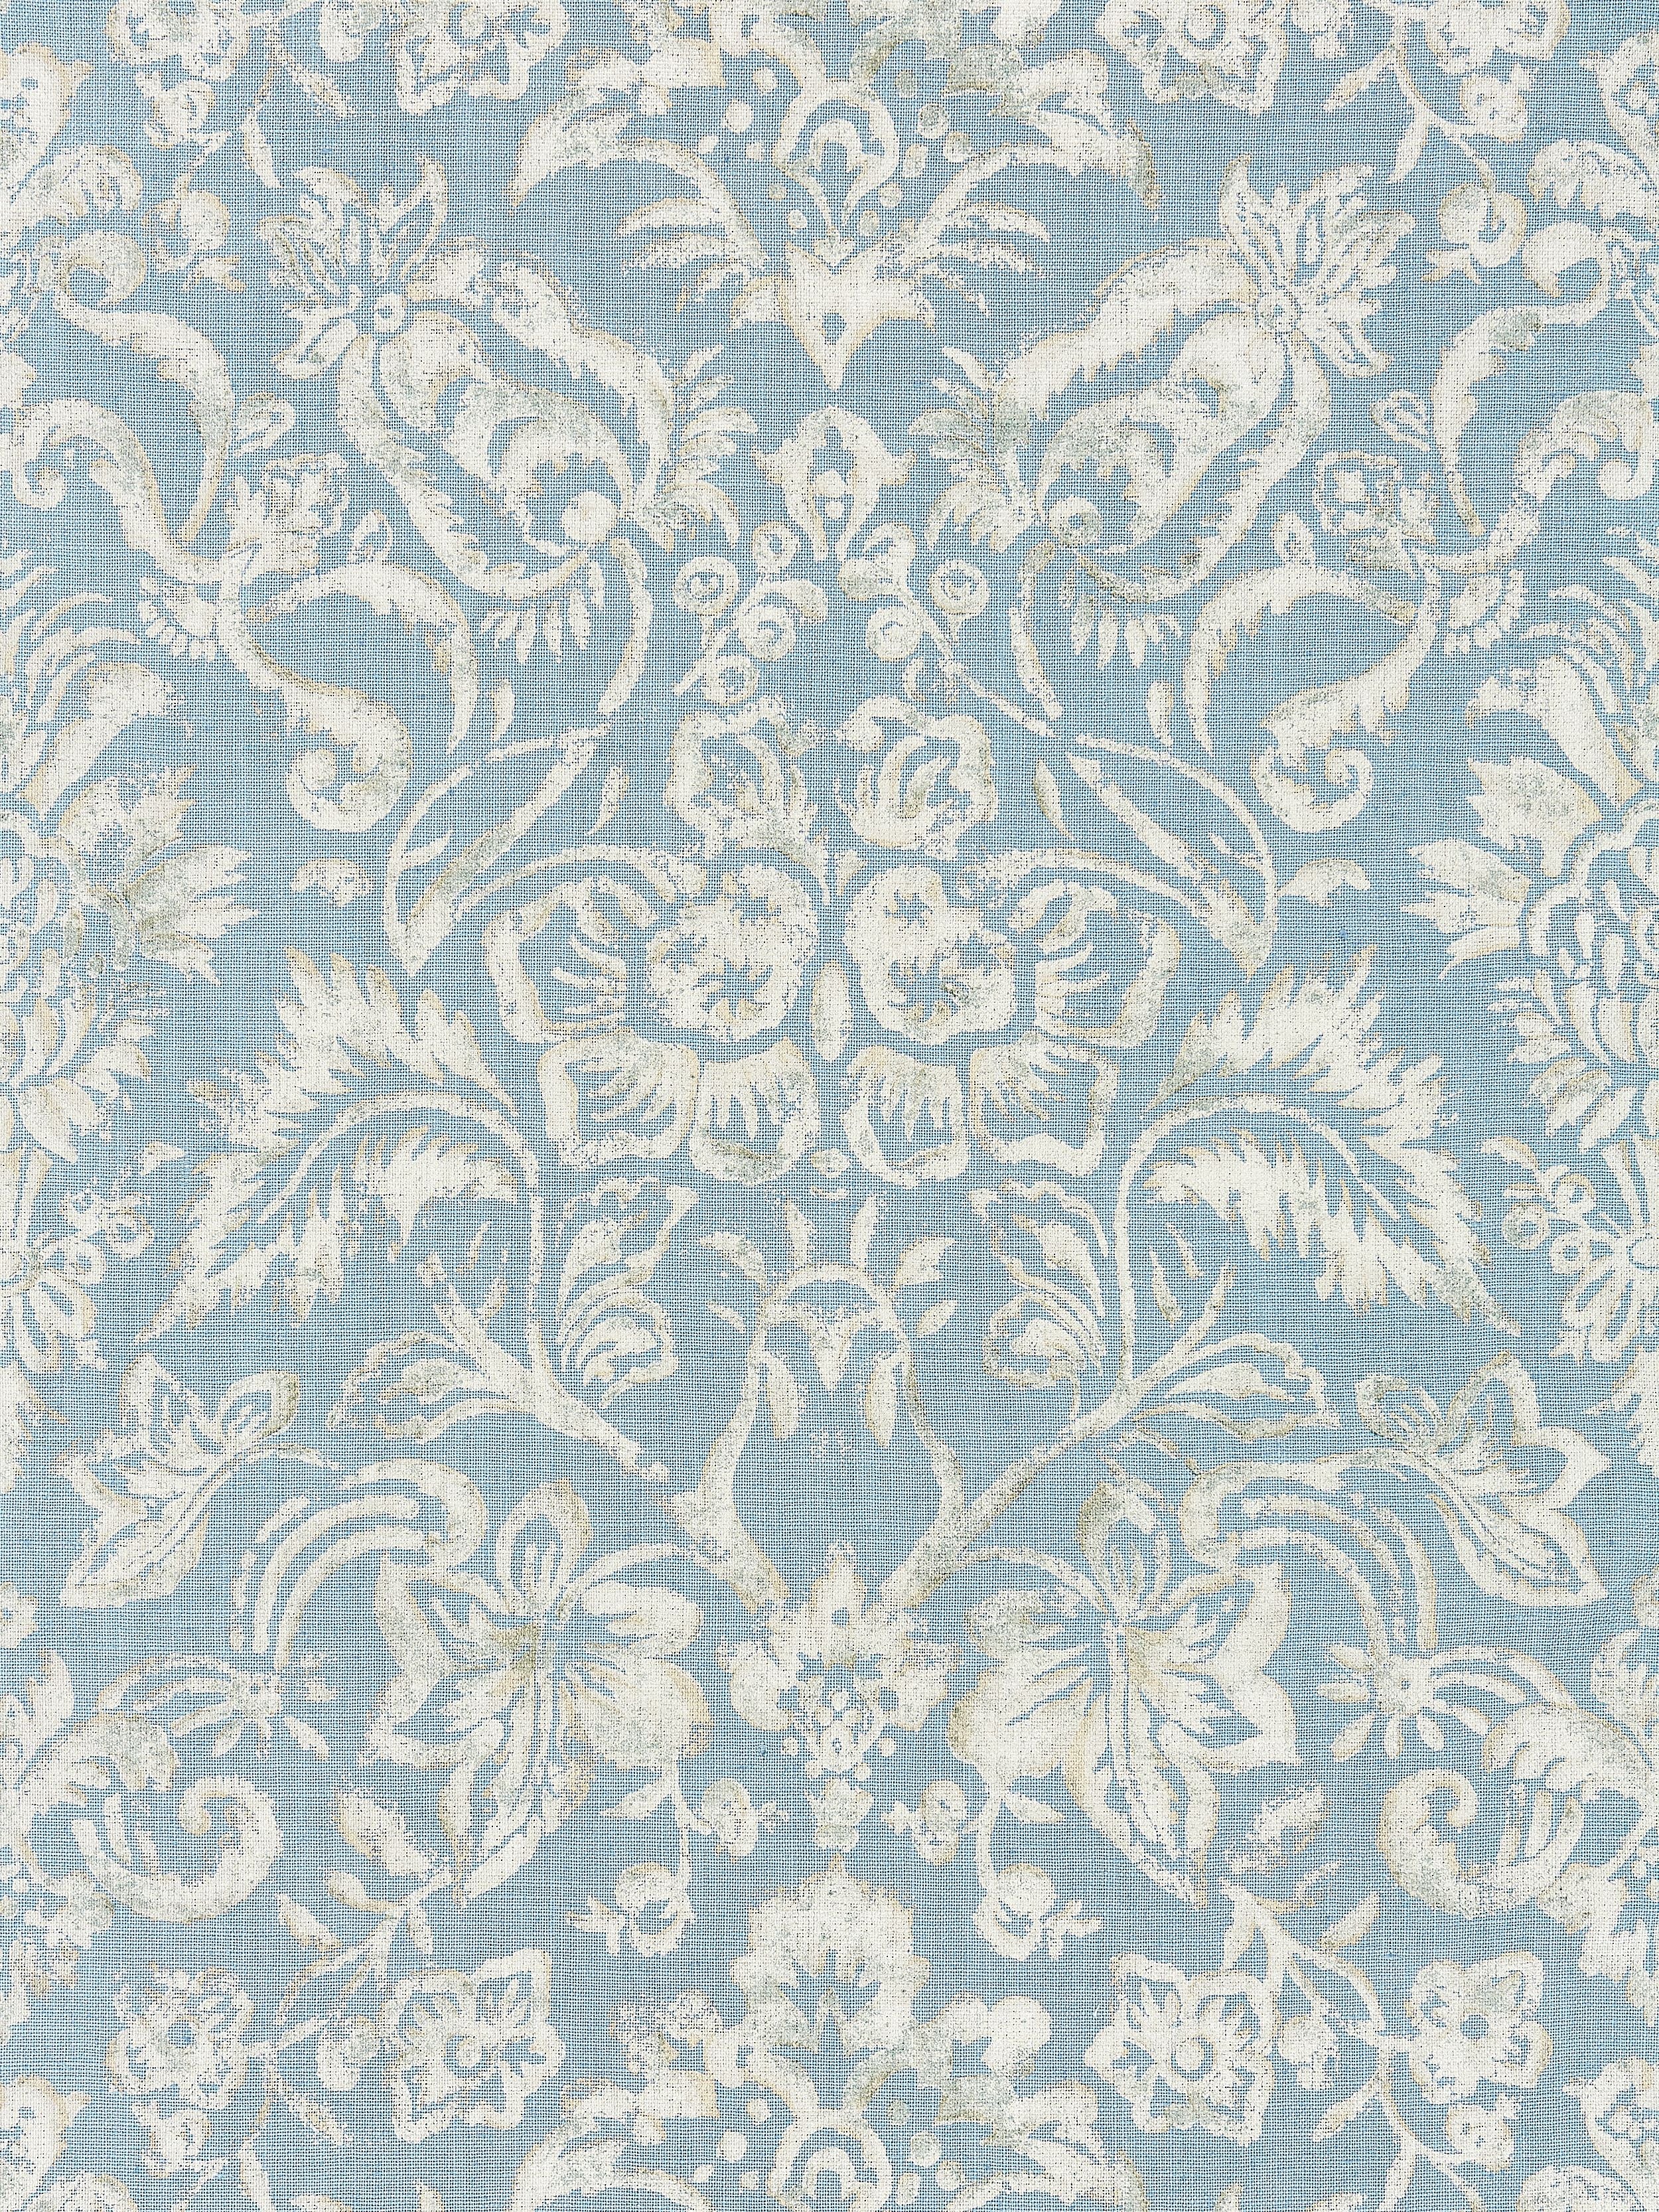 Mansfield Damask Print fabric in bluestone and silver color - pattern number SC 000216598 - by Scalamandre in the Scalamandre Fabrics Book 1 collection